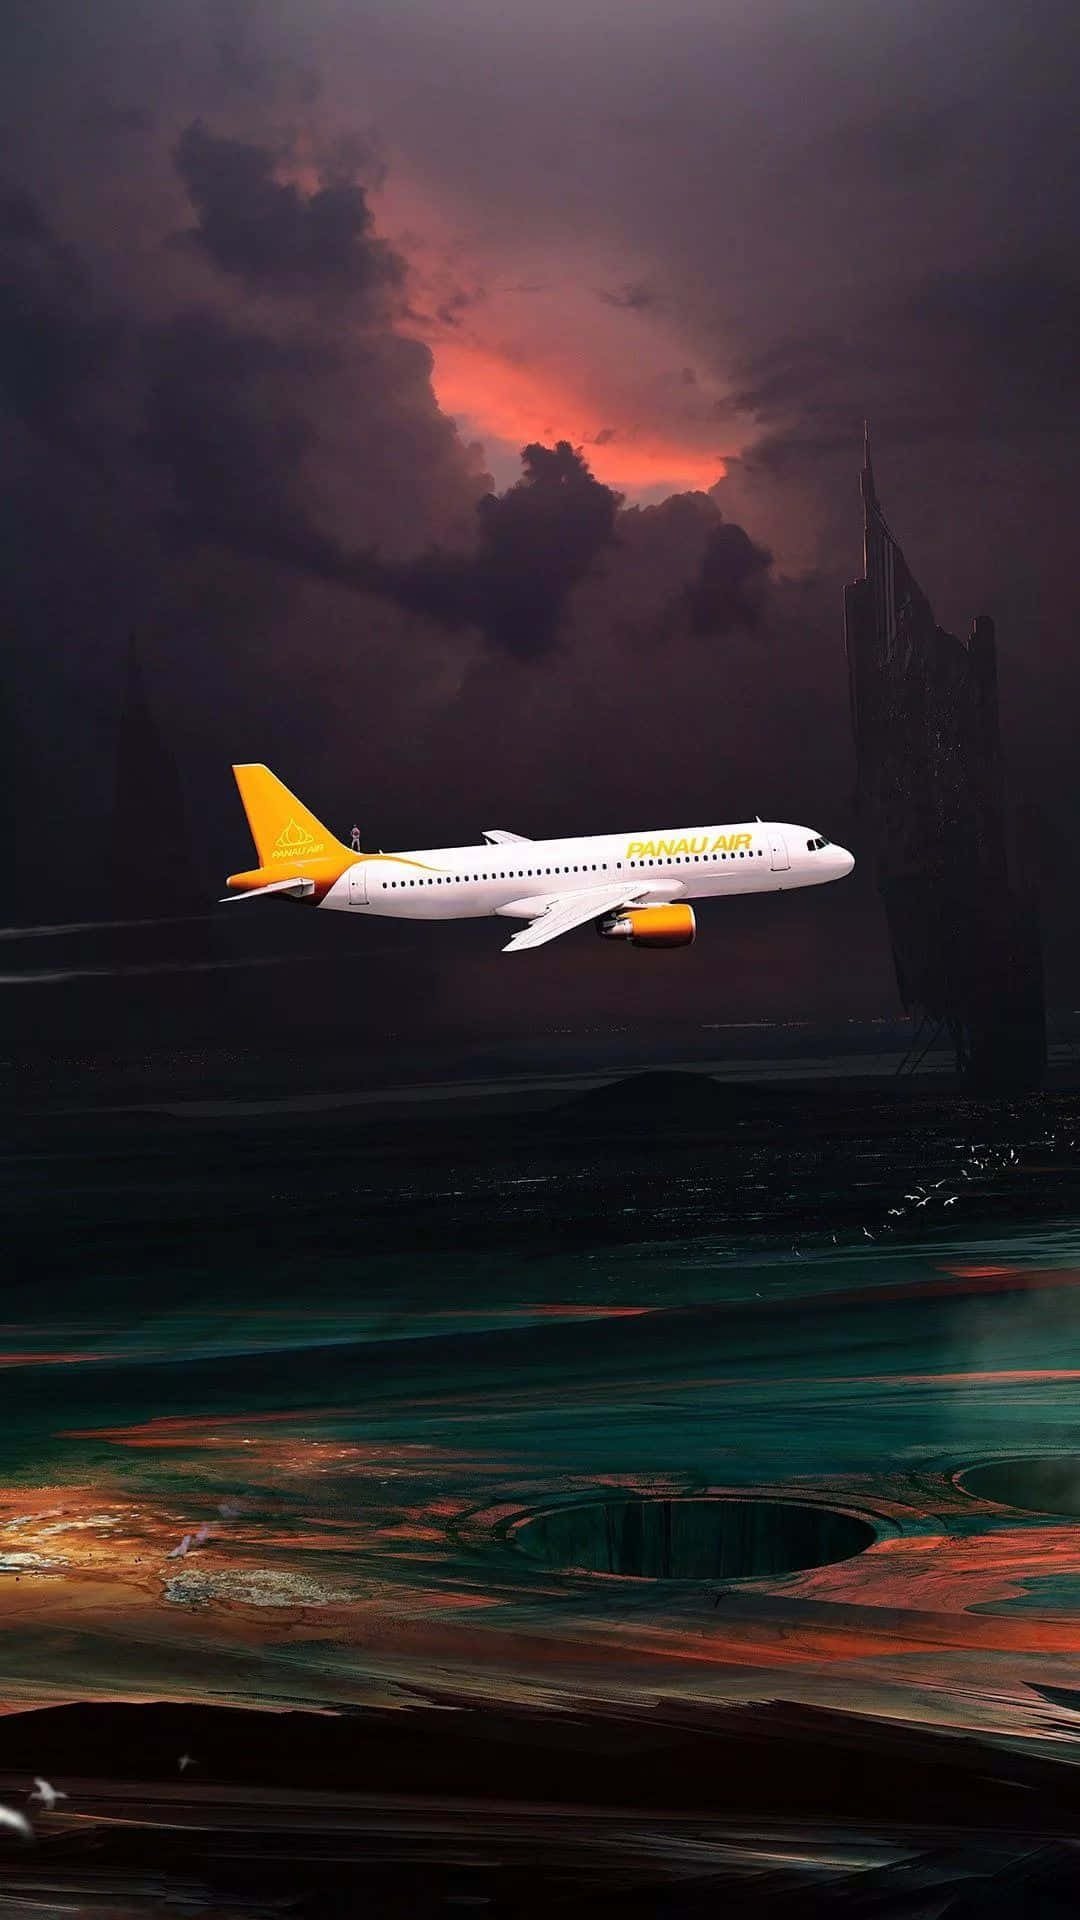 A plane takes flight, with the new iPhone in tow Wallpaper